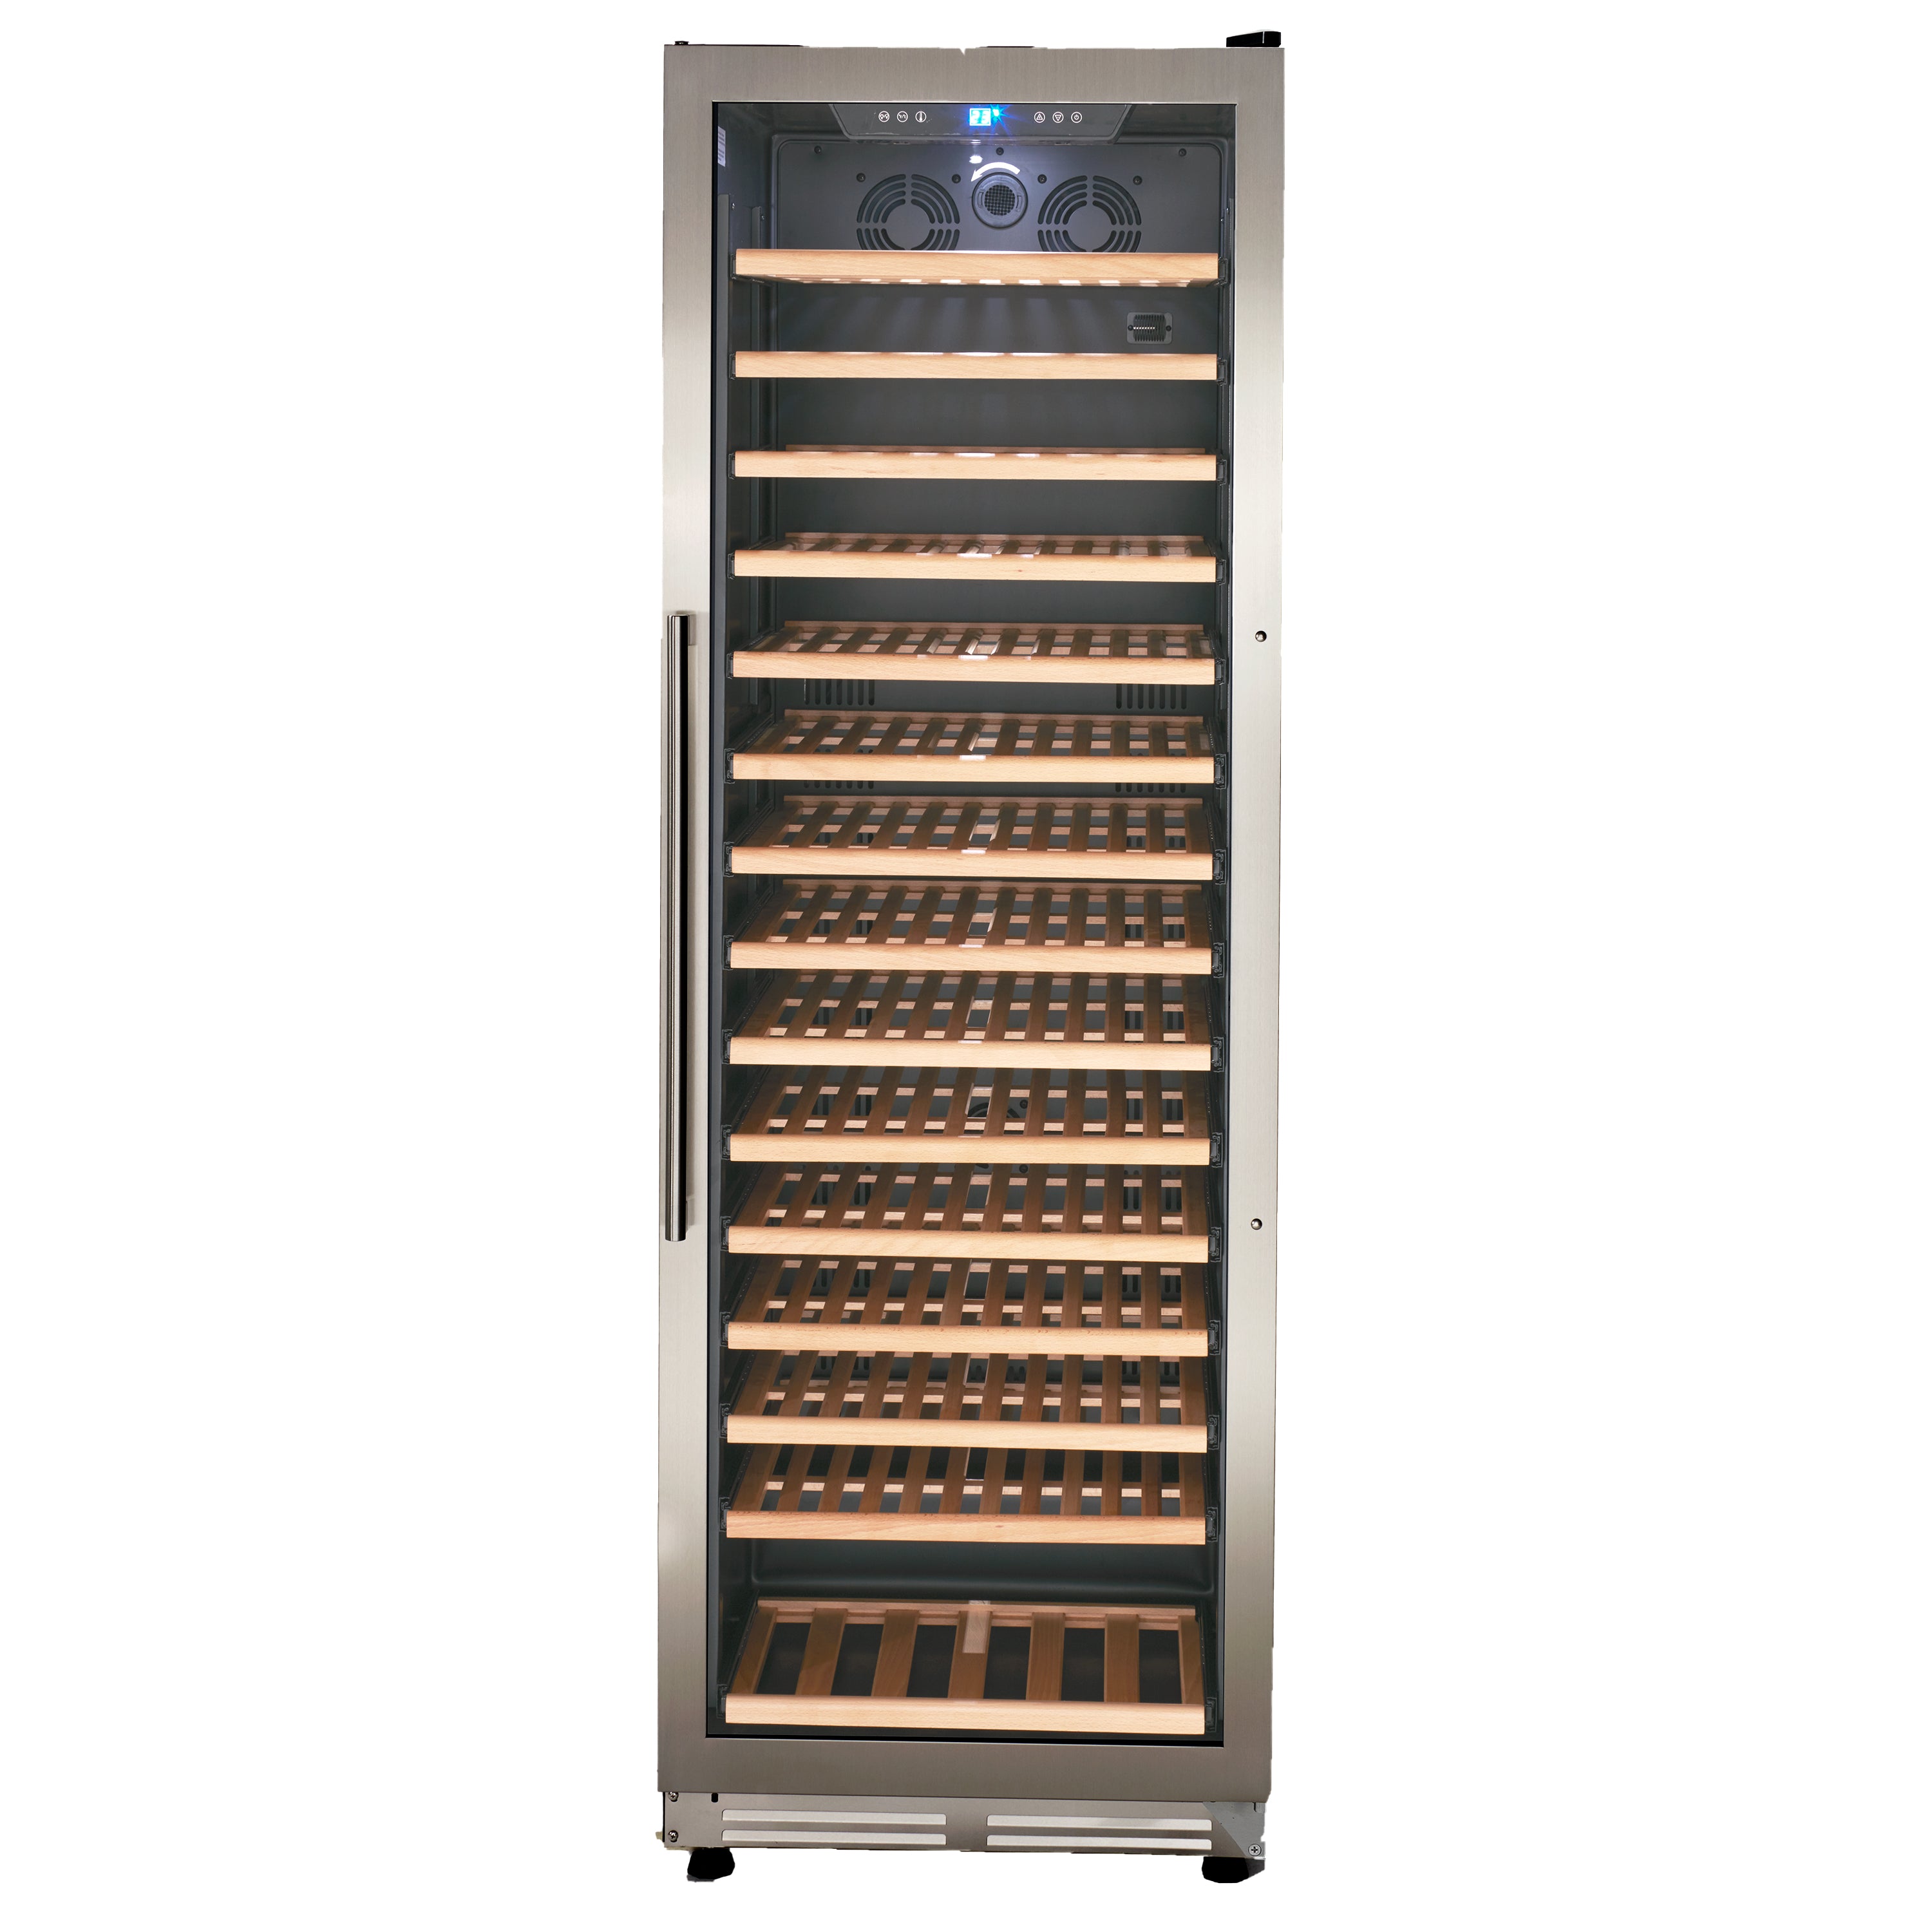 Avanti - WCF165S3SS, Avanti DESIGNER Series Single-Zone Wine Cooler, 165 Bottle Capacity,  in Stainless Steel with Wood Accent Shelving